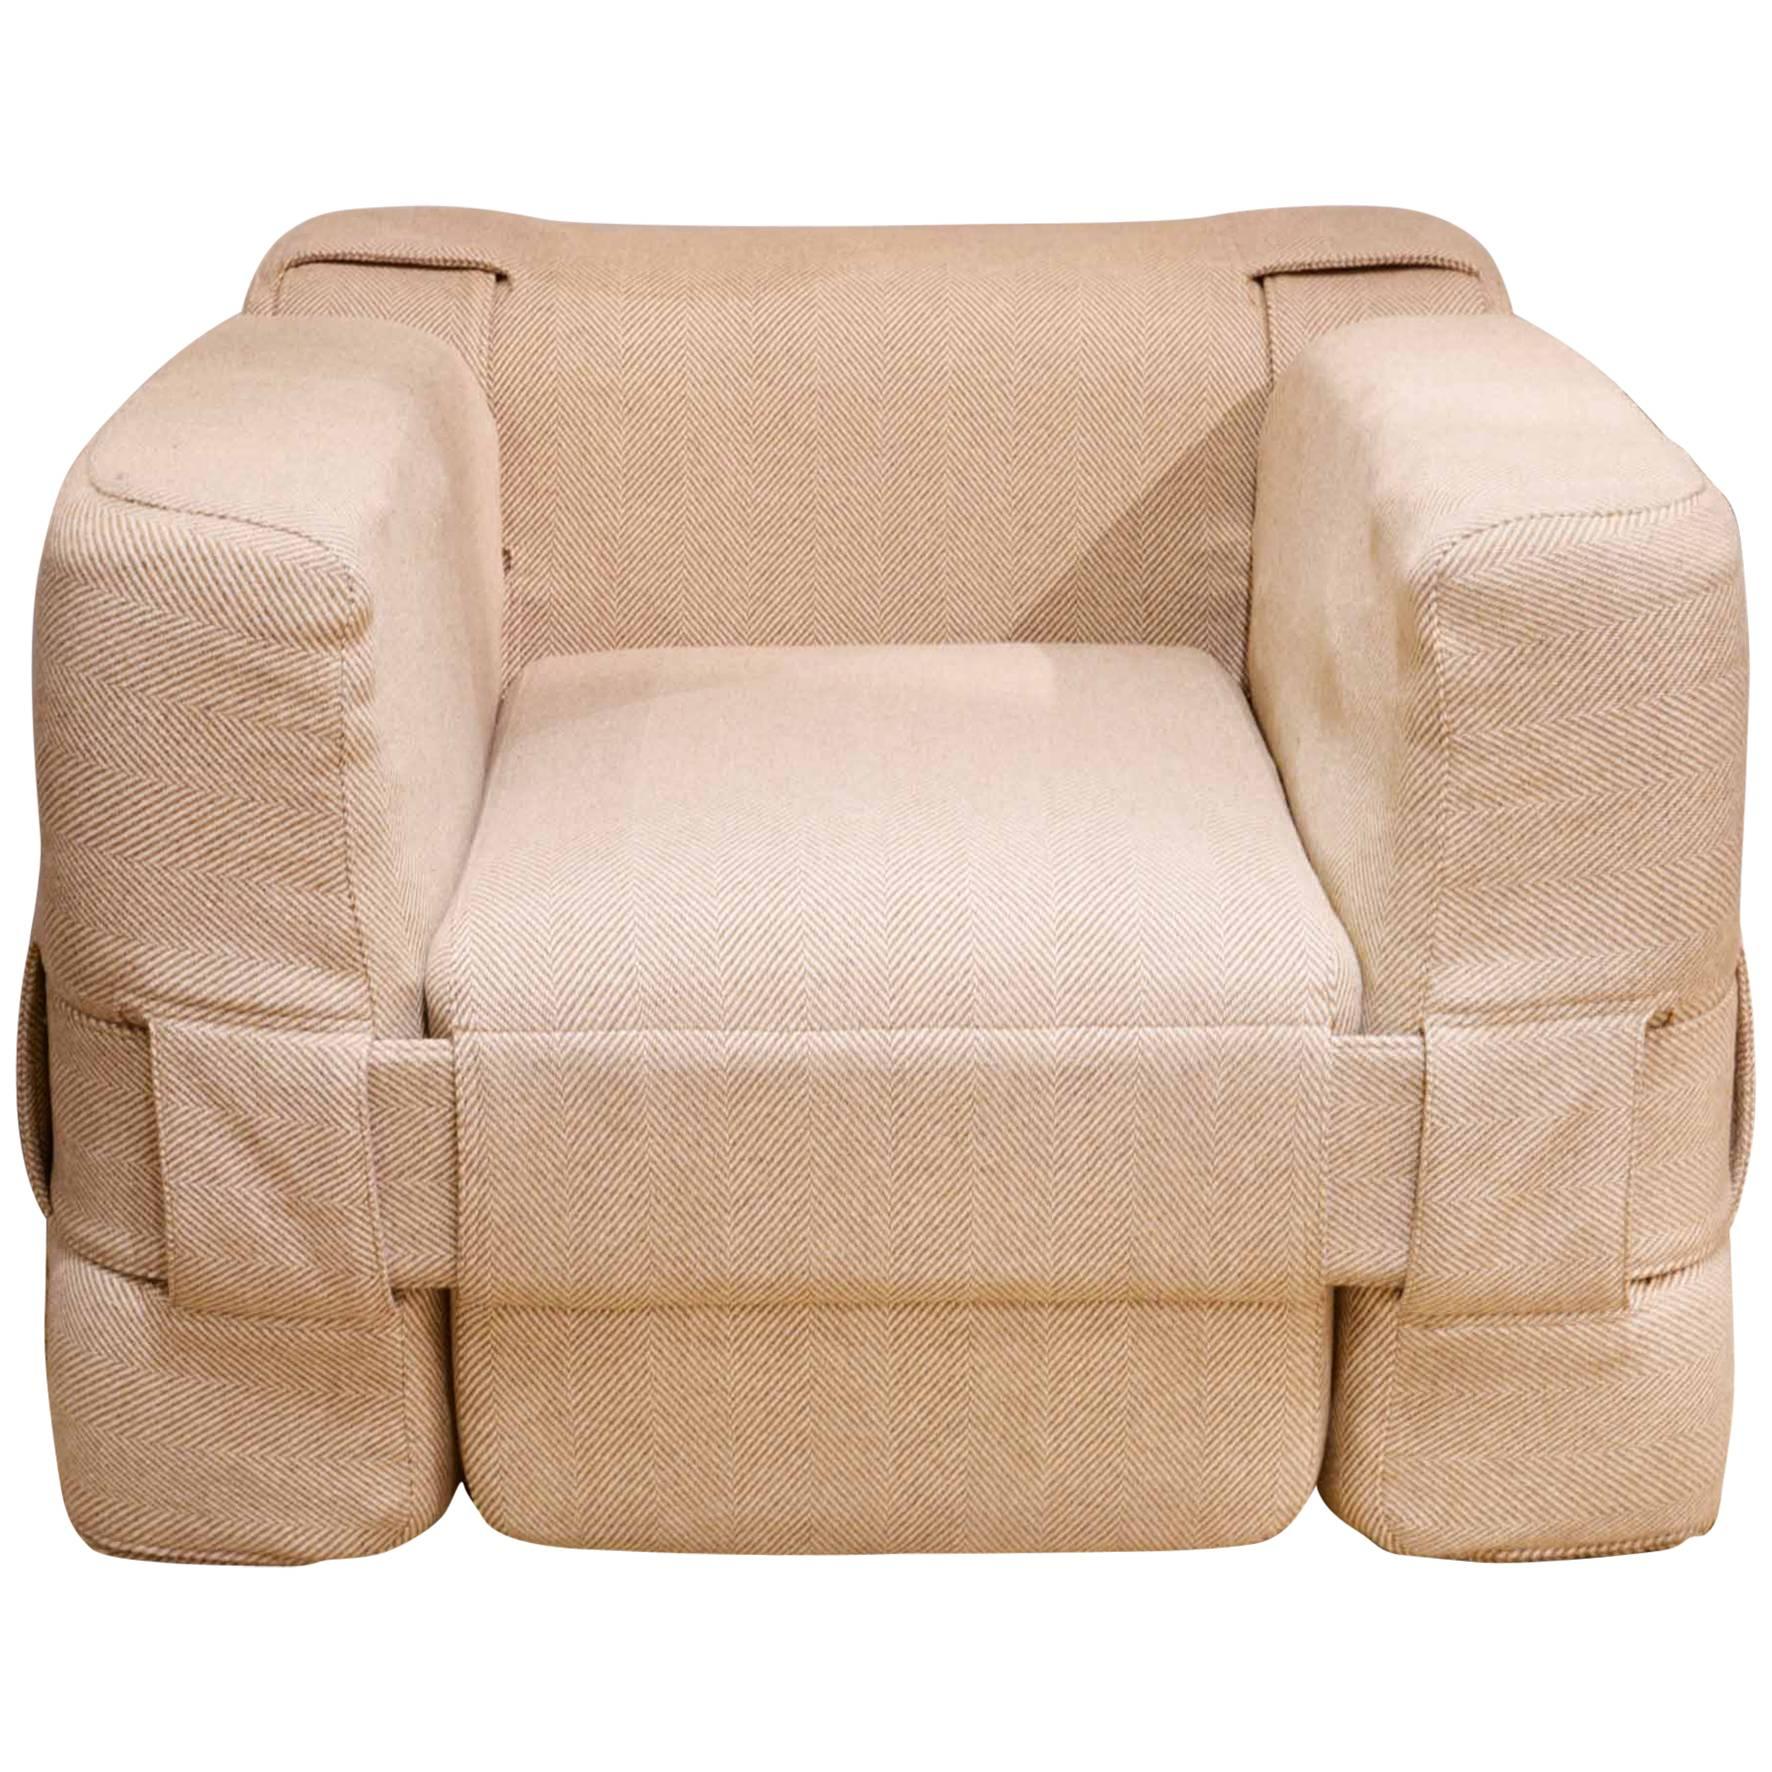 Mario Bellini, Armchair in Fabric and Foam, Edition Cassina, 1970s For Sale